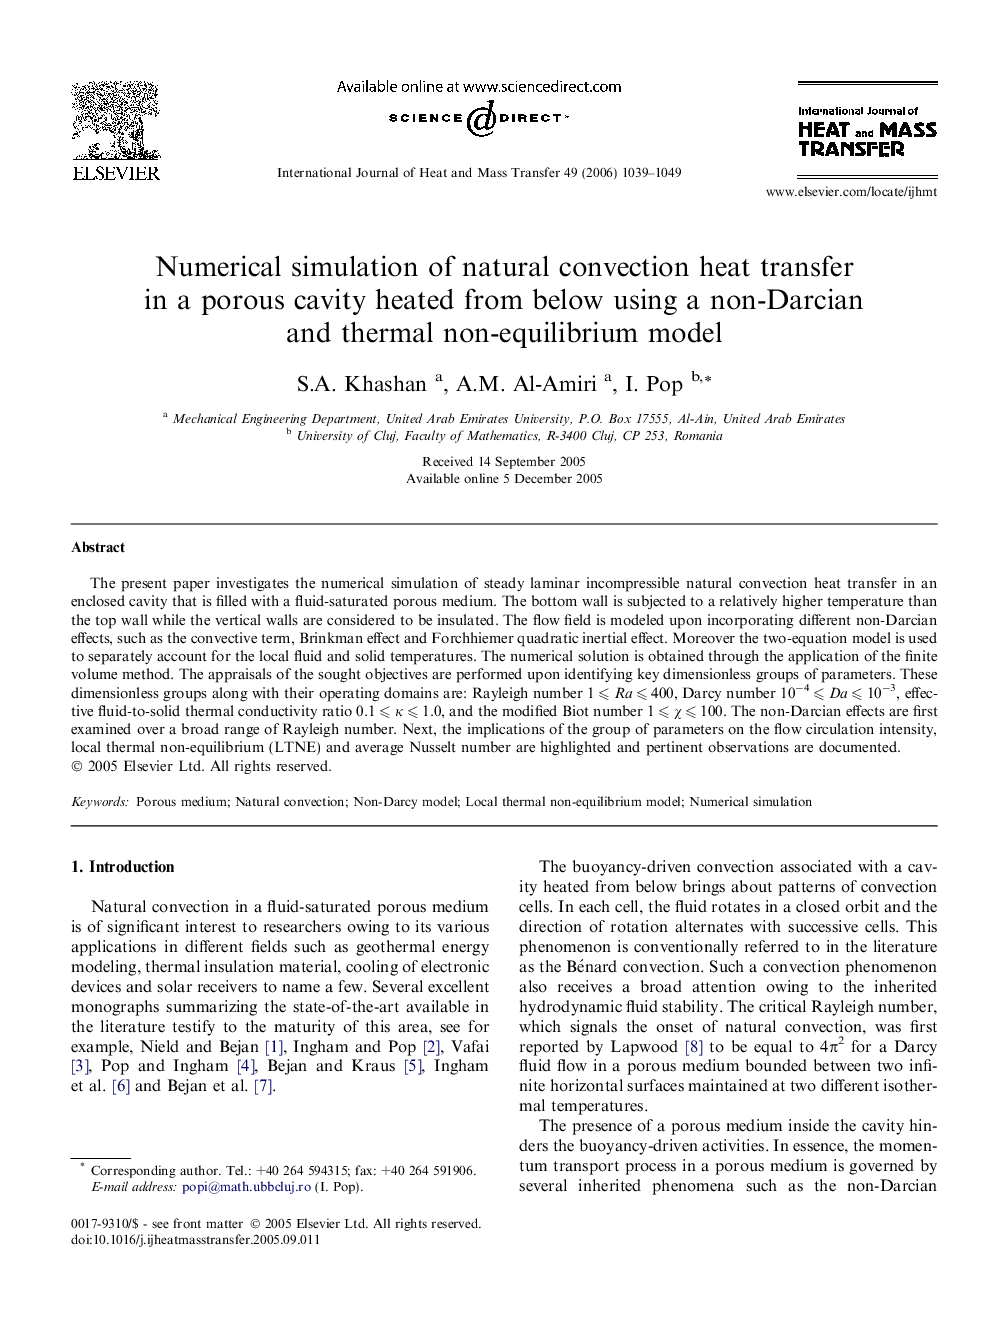 Numerical simulation of natural convection heat transfer in a porous cavity heated from below using a non-Darcian and thermal non-equilibrium model